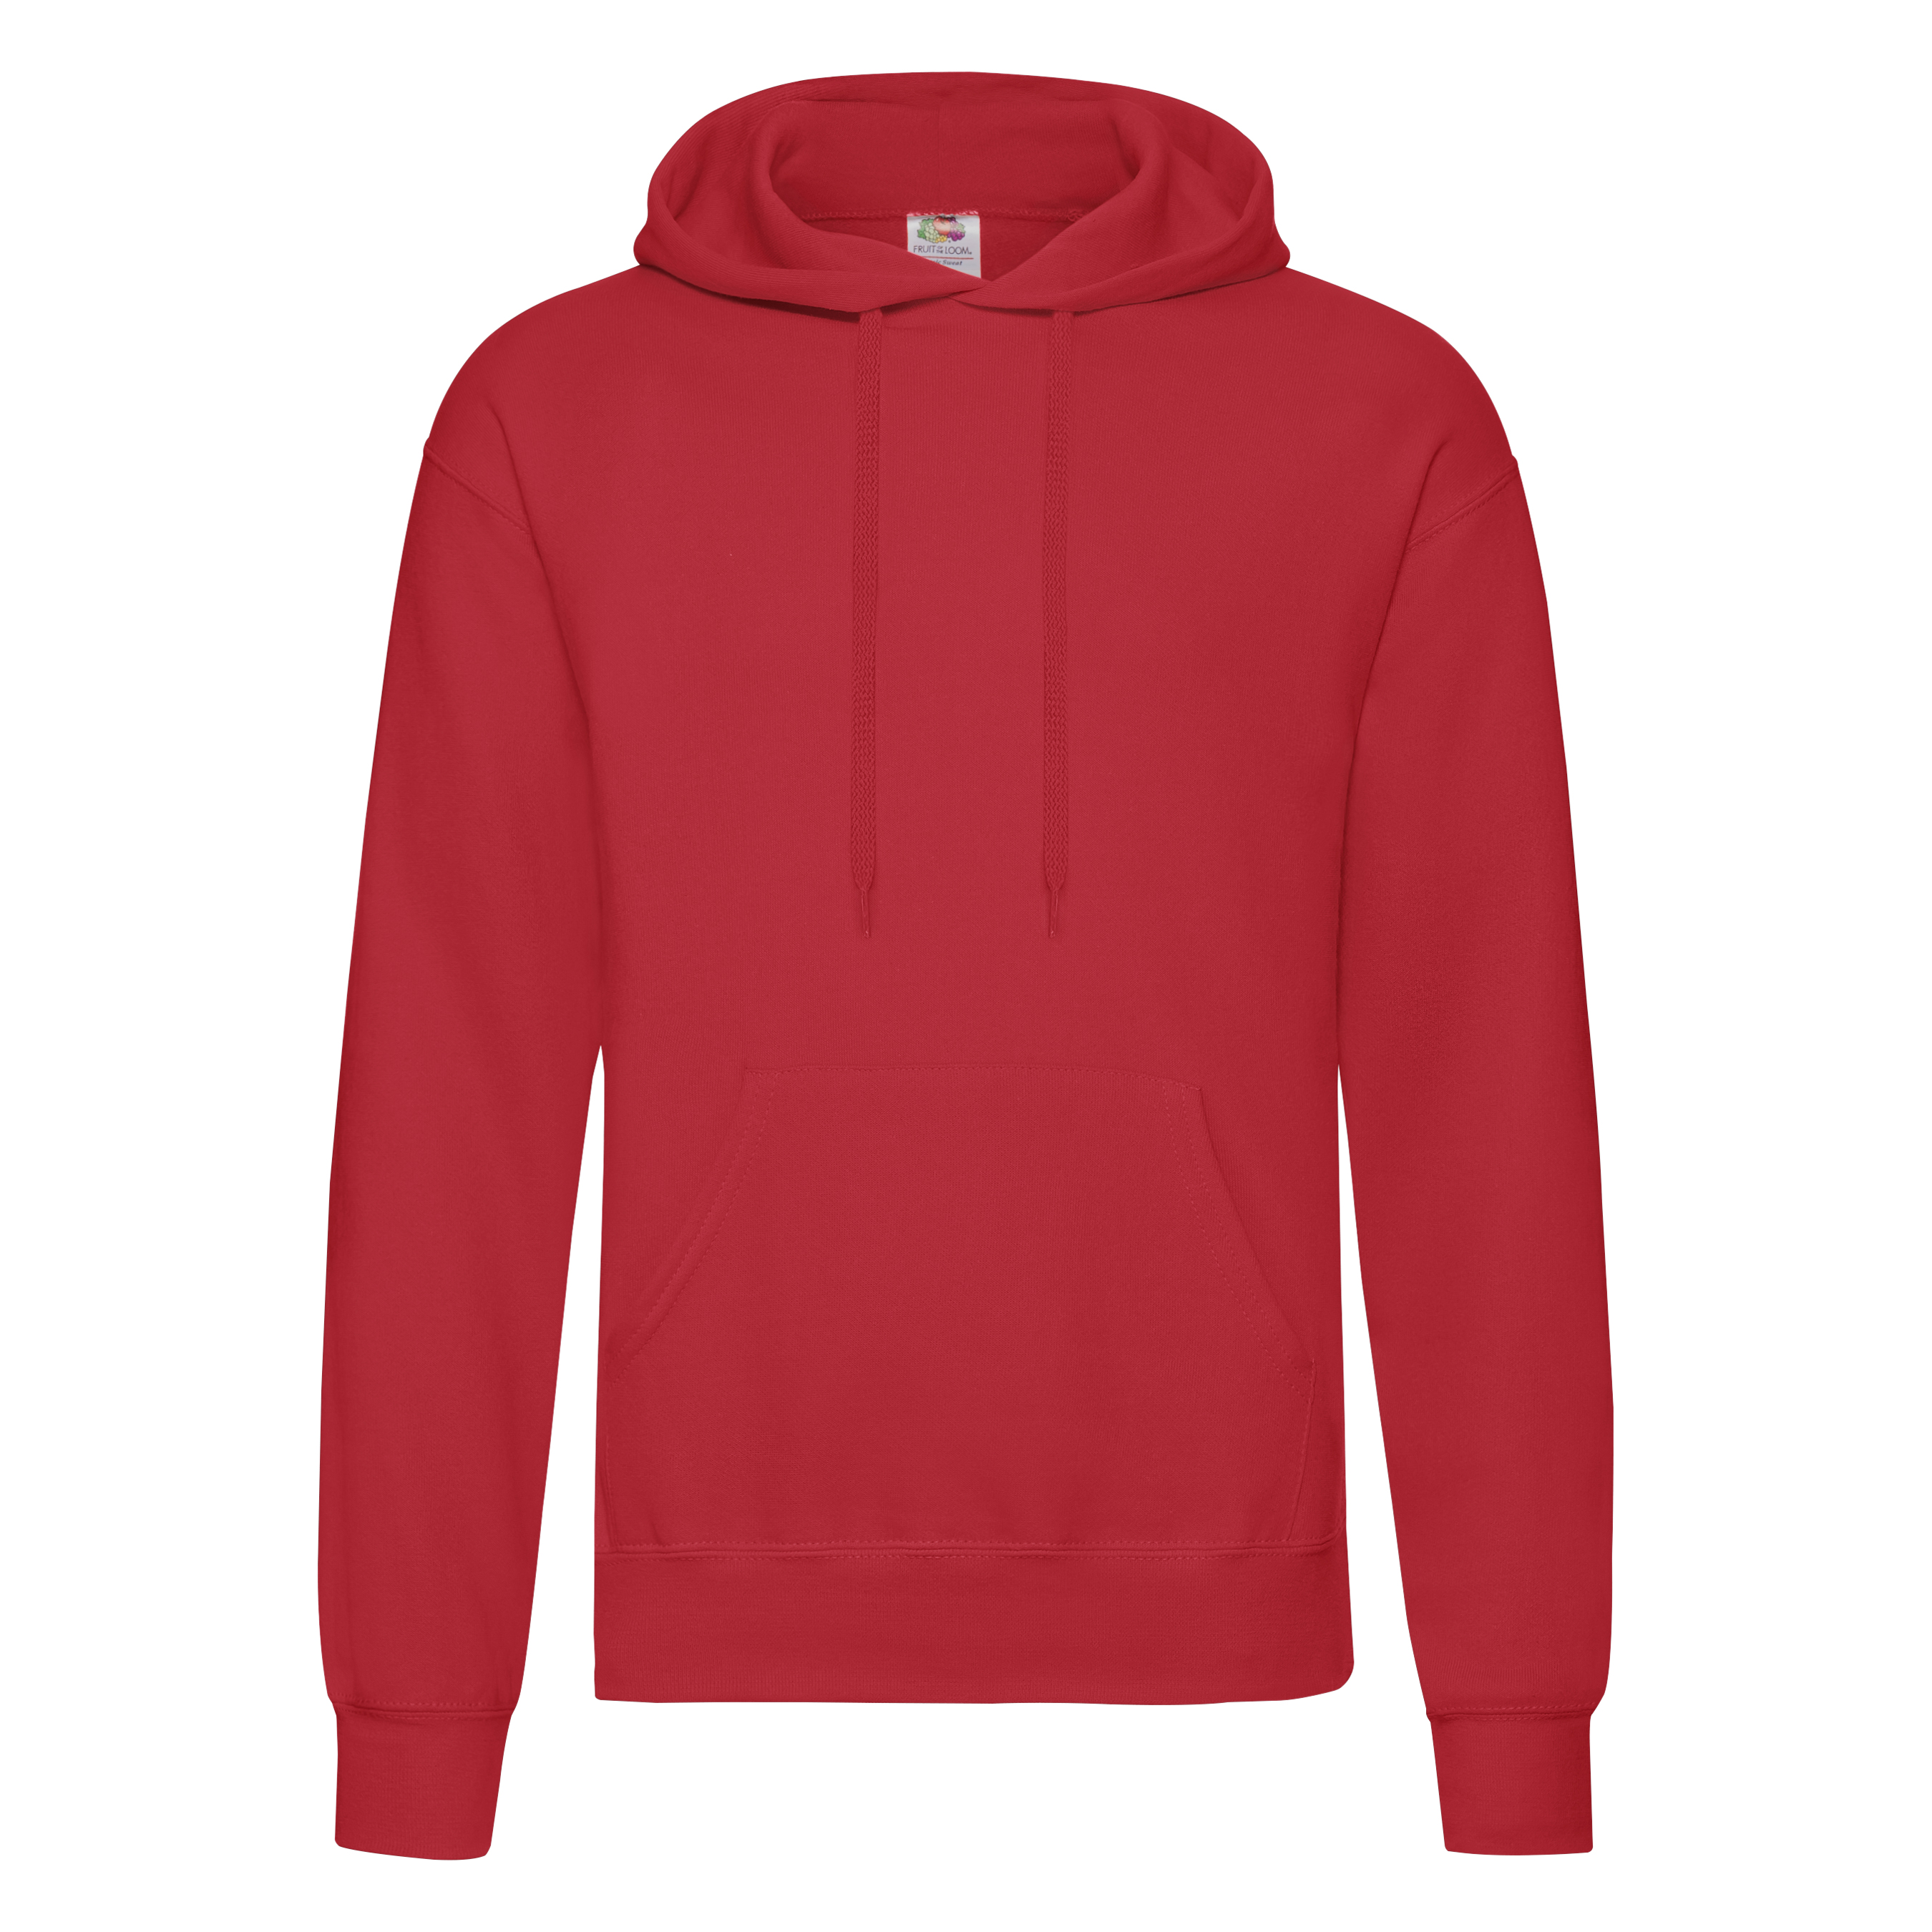 ax-httpswebsystems.s3.amazonaws.comtmp_for_downloadfruit-of-the-loom-classic-80-20-hooded-sweatshirt-red.jpeg